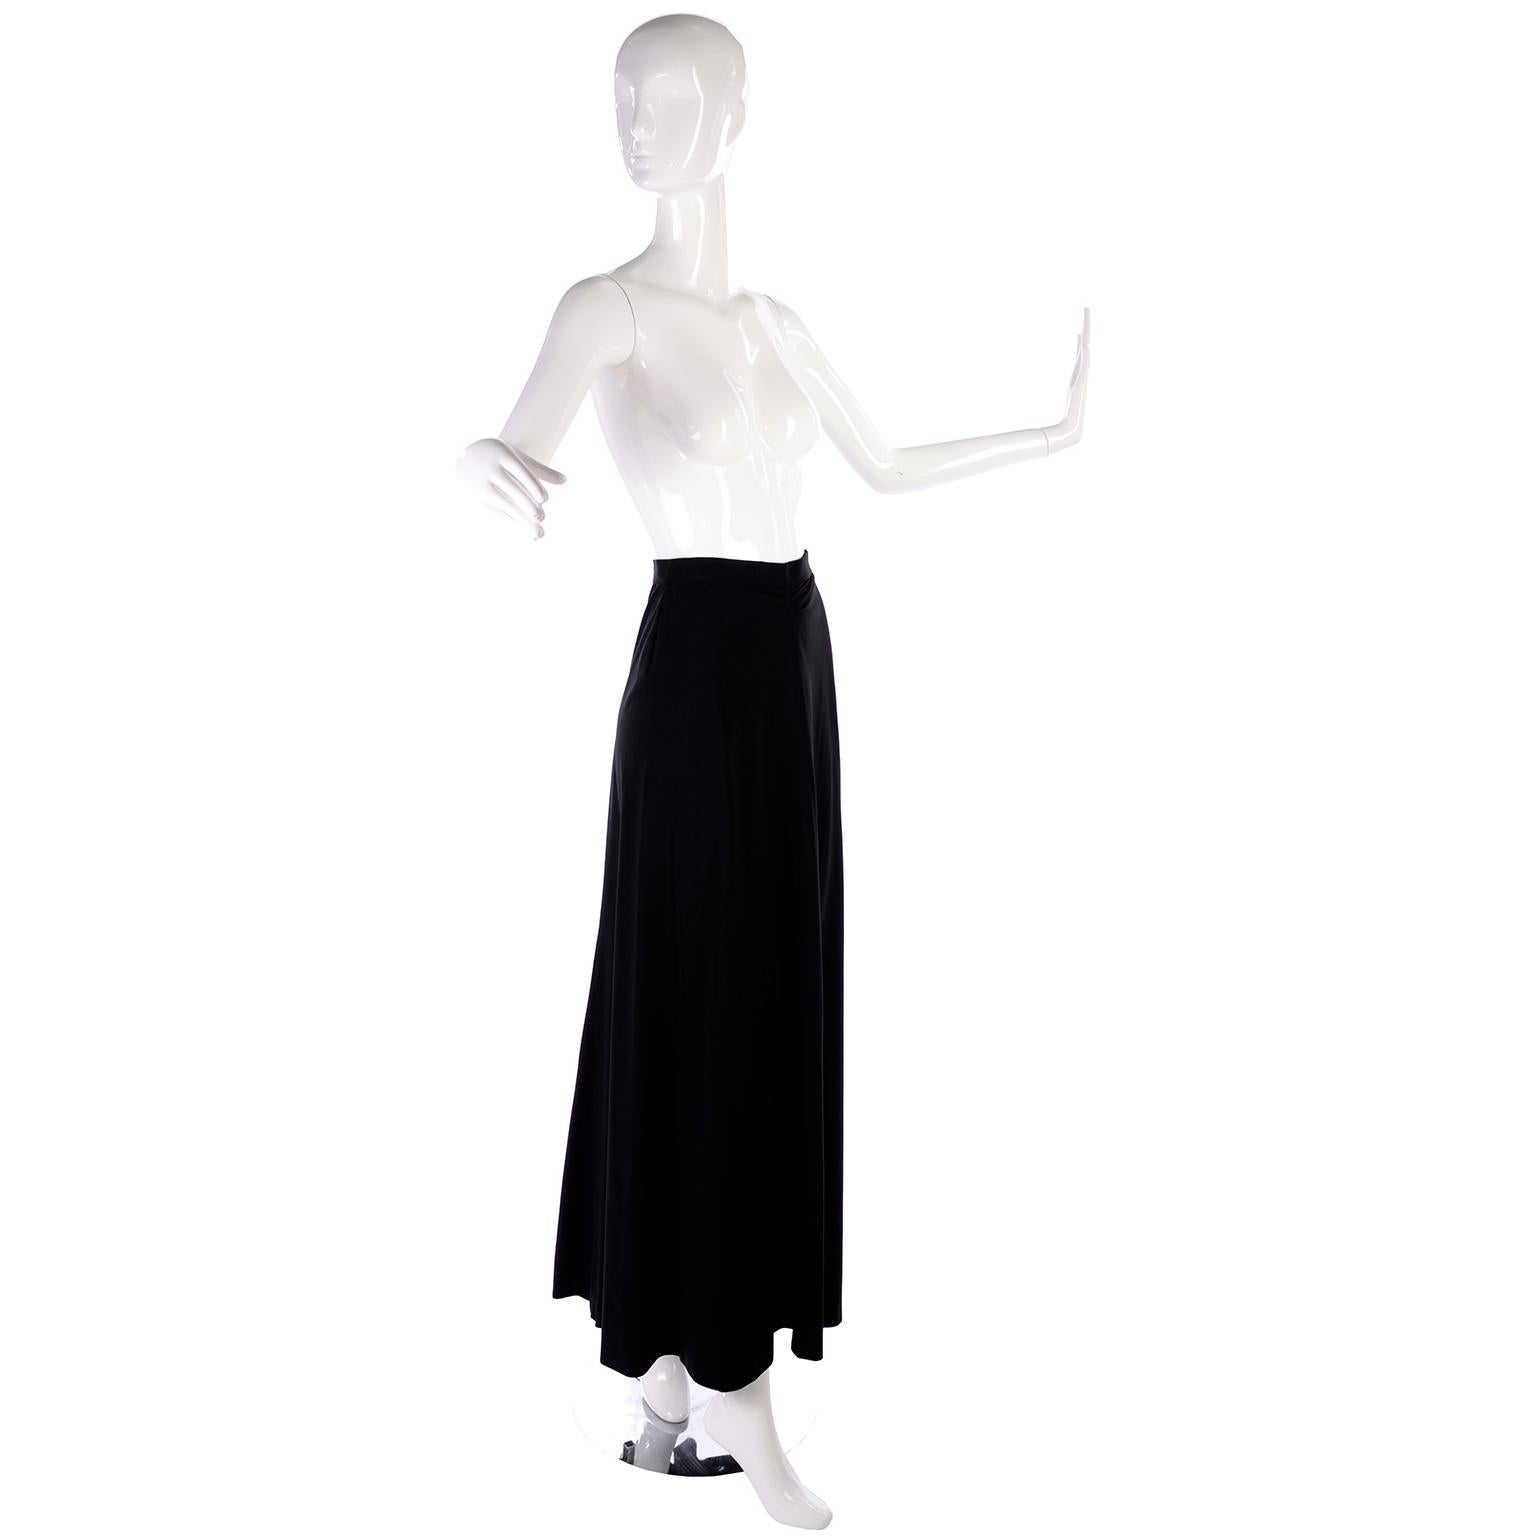 The is really a perfect black maxi skirt from Chanel! Though it may look simple at first glance, when worn, it lays so perfectly and is incredibly flattering. This wonderful black skirt is from their 1999 Cruise collection,and was designed by Karl